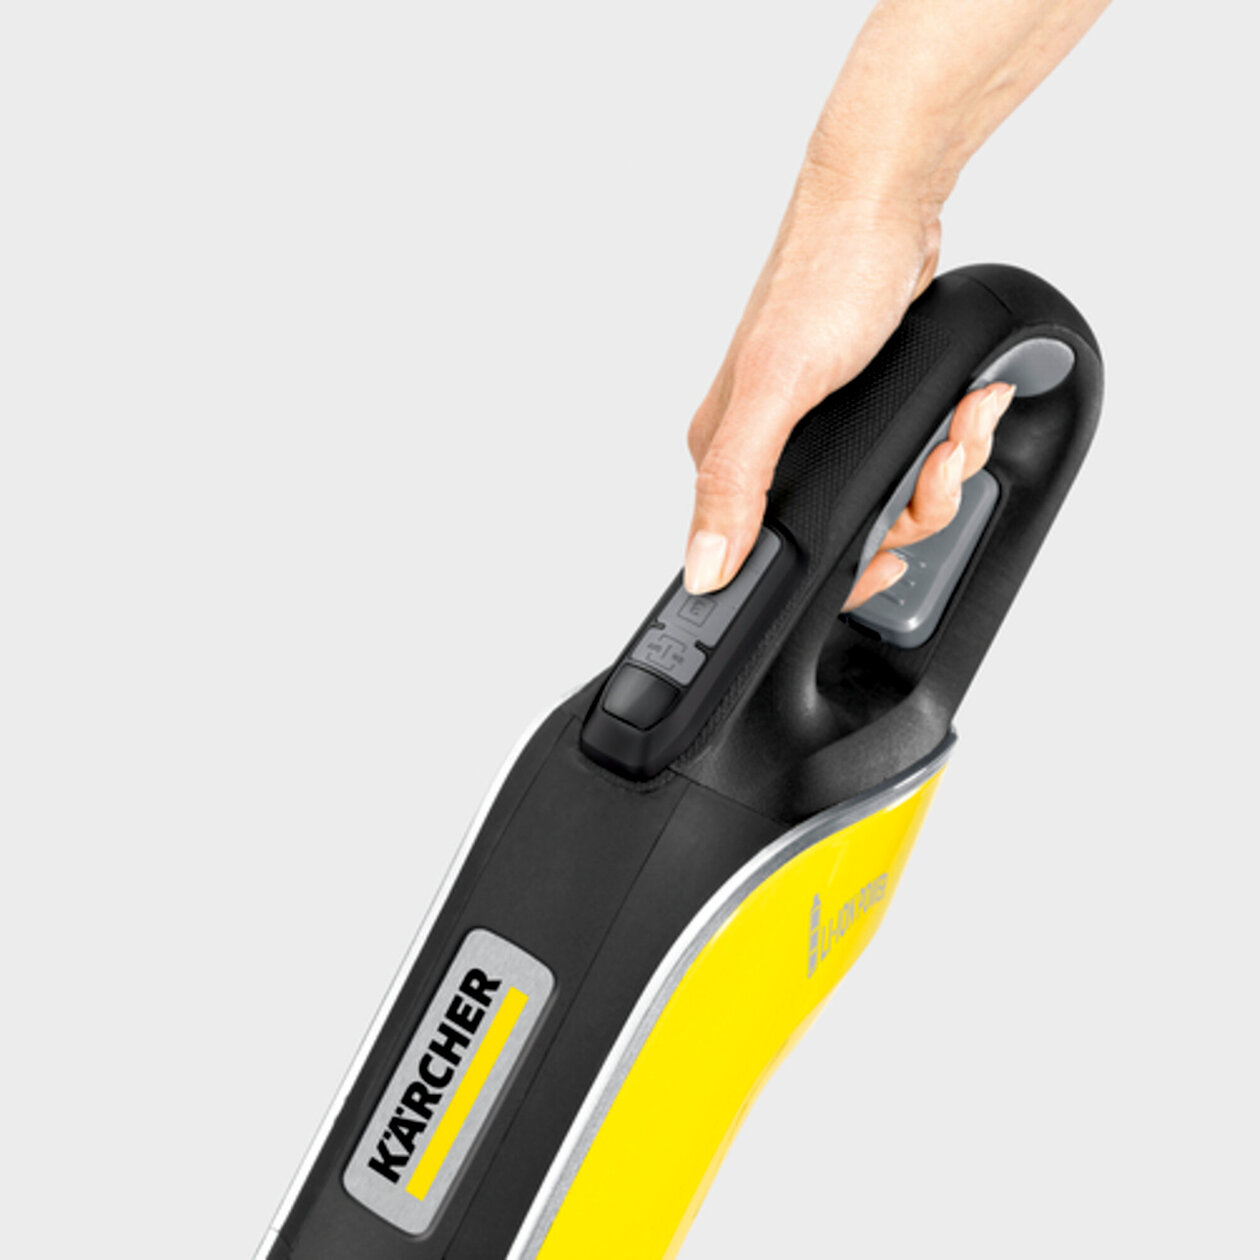 Handheld vacuum cleaner VC 5 Cordless: Three-stage power control